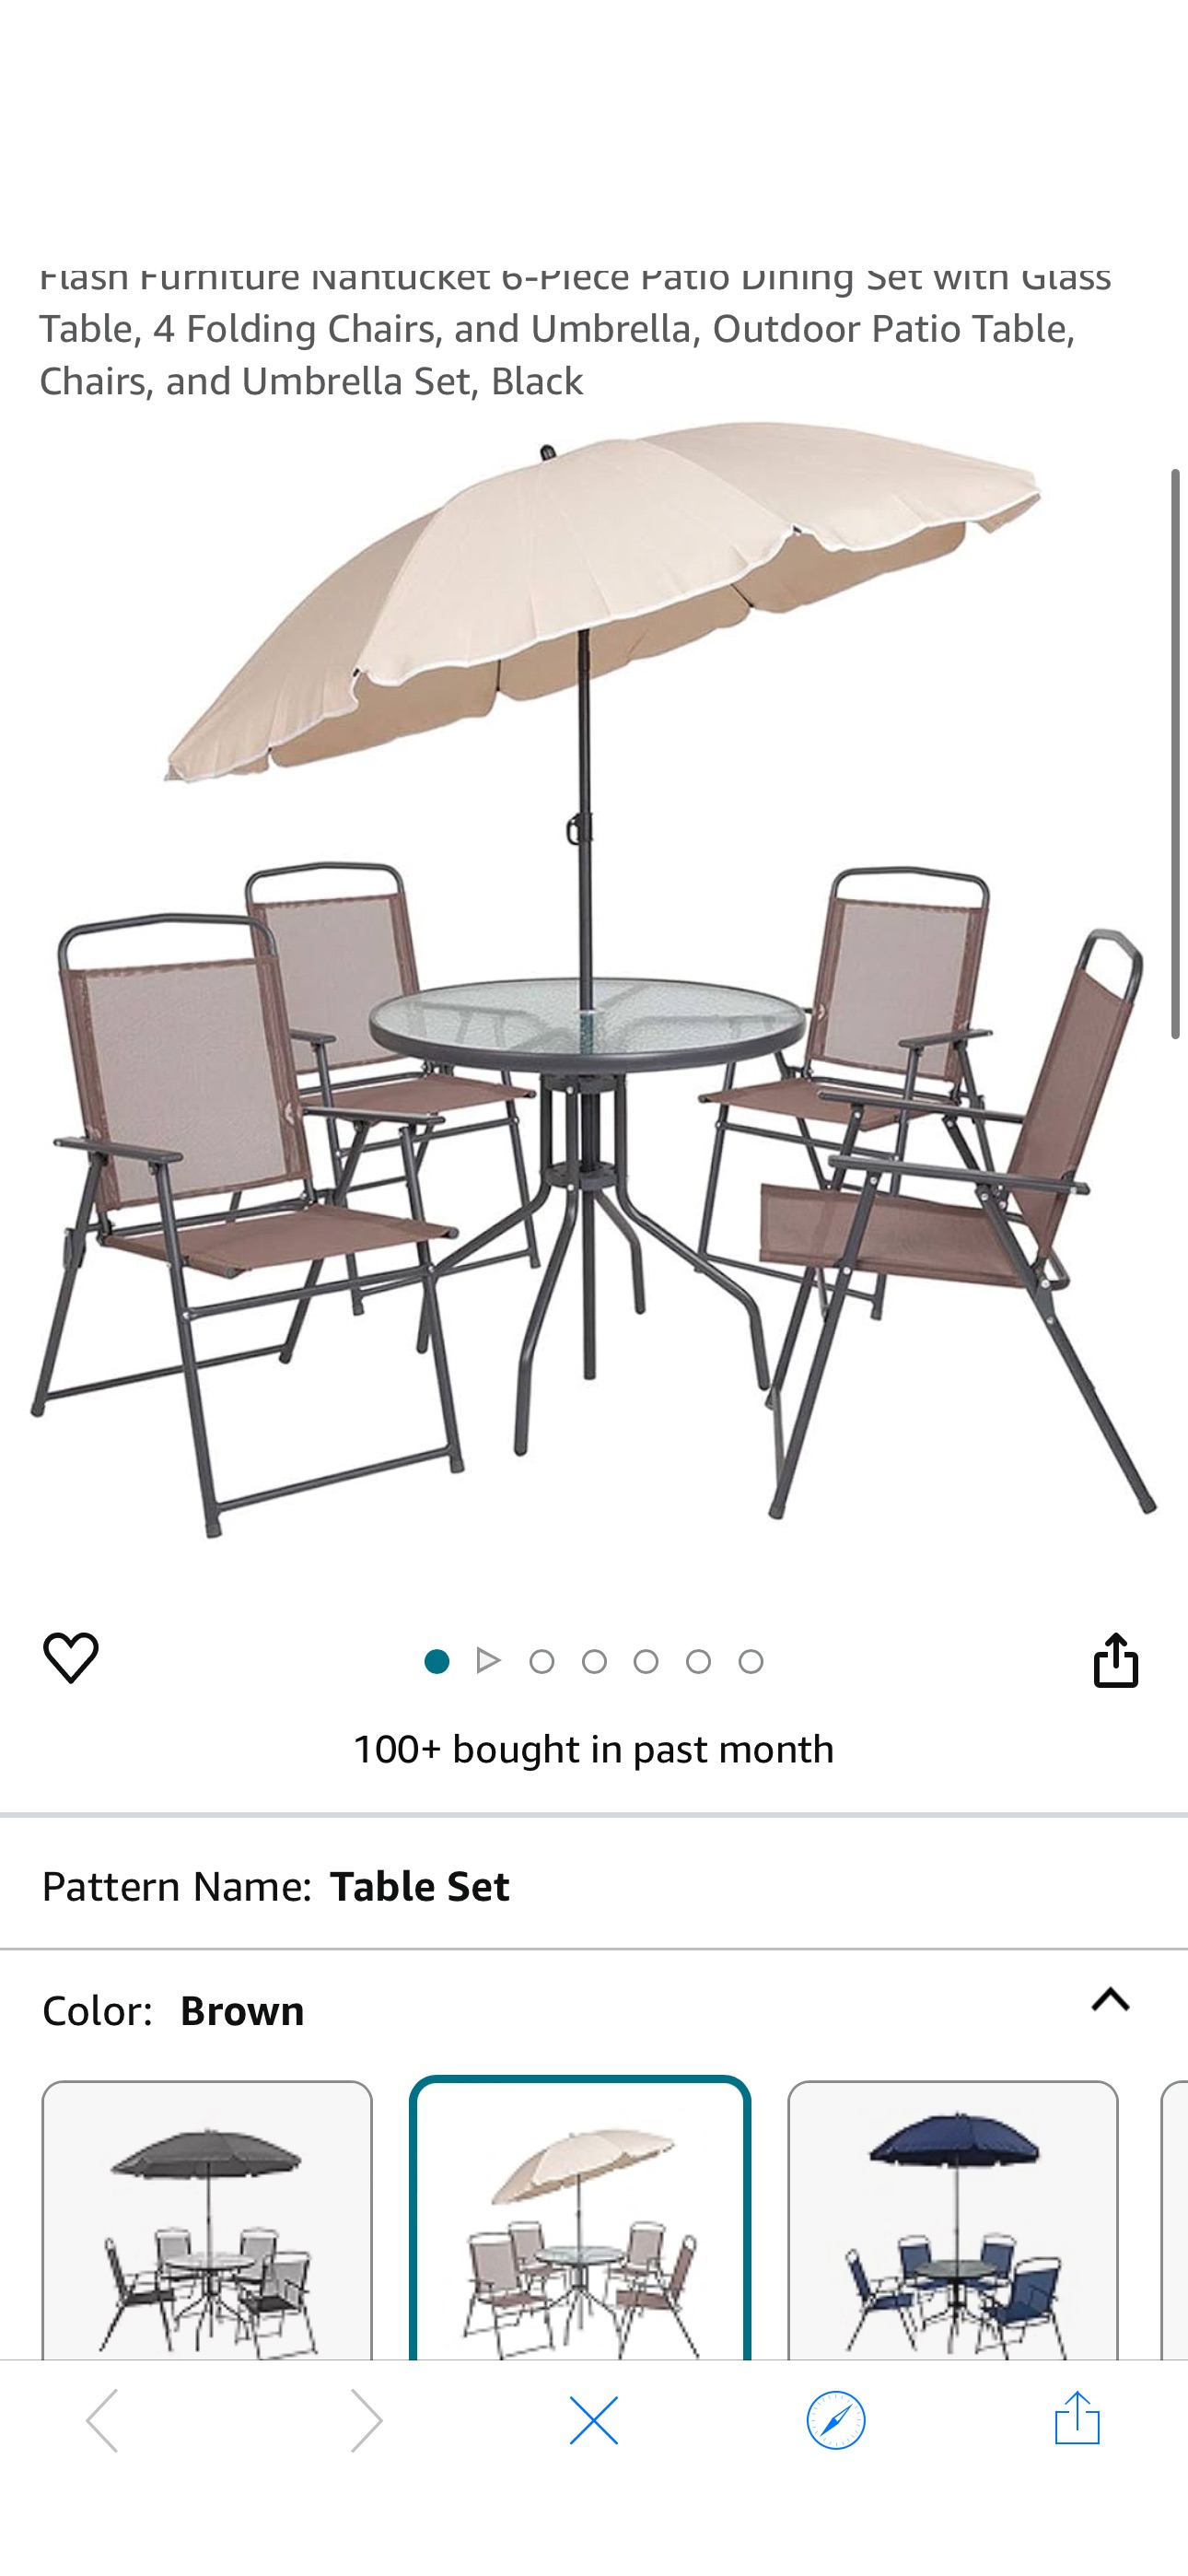 Amazon.com: Flash Furniture Nantucket 6-Piece Patio Dining Set with Glass Table, 4 Folding Chairs, and Umbrella, Outdoor Patio Table, Chairs, and Umbrella Set, Black : Patio, Lawn & Garden